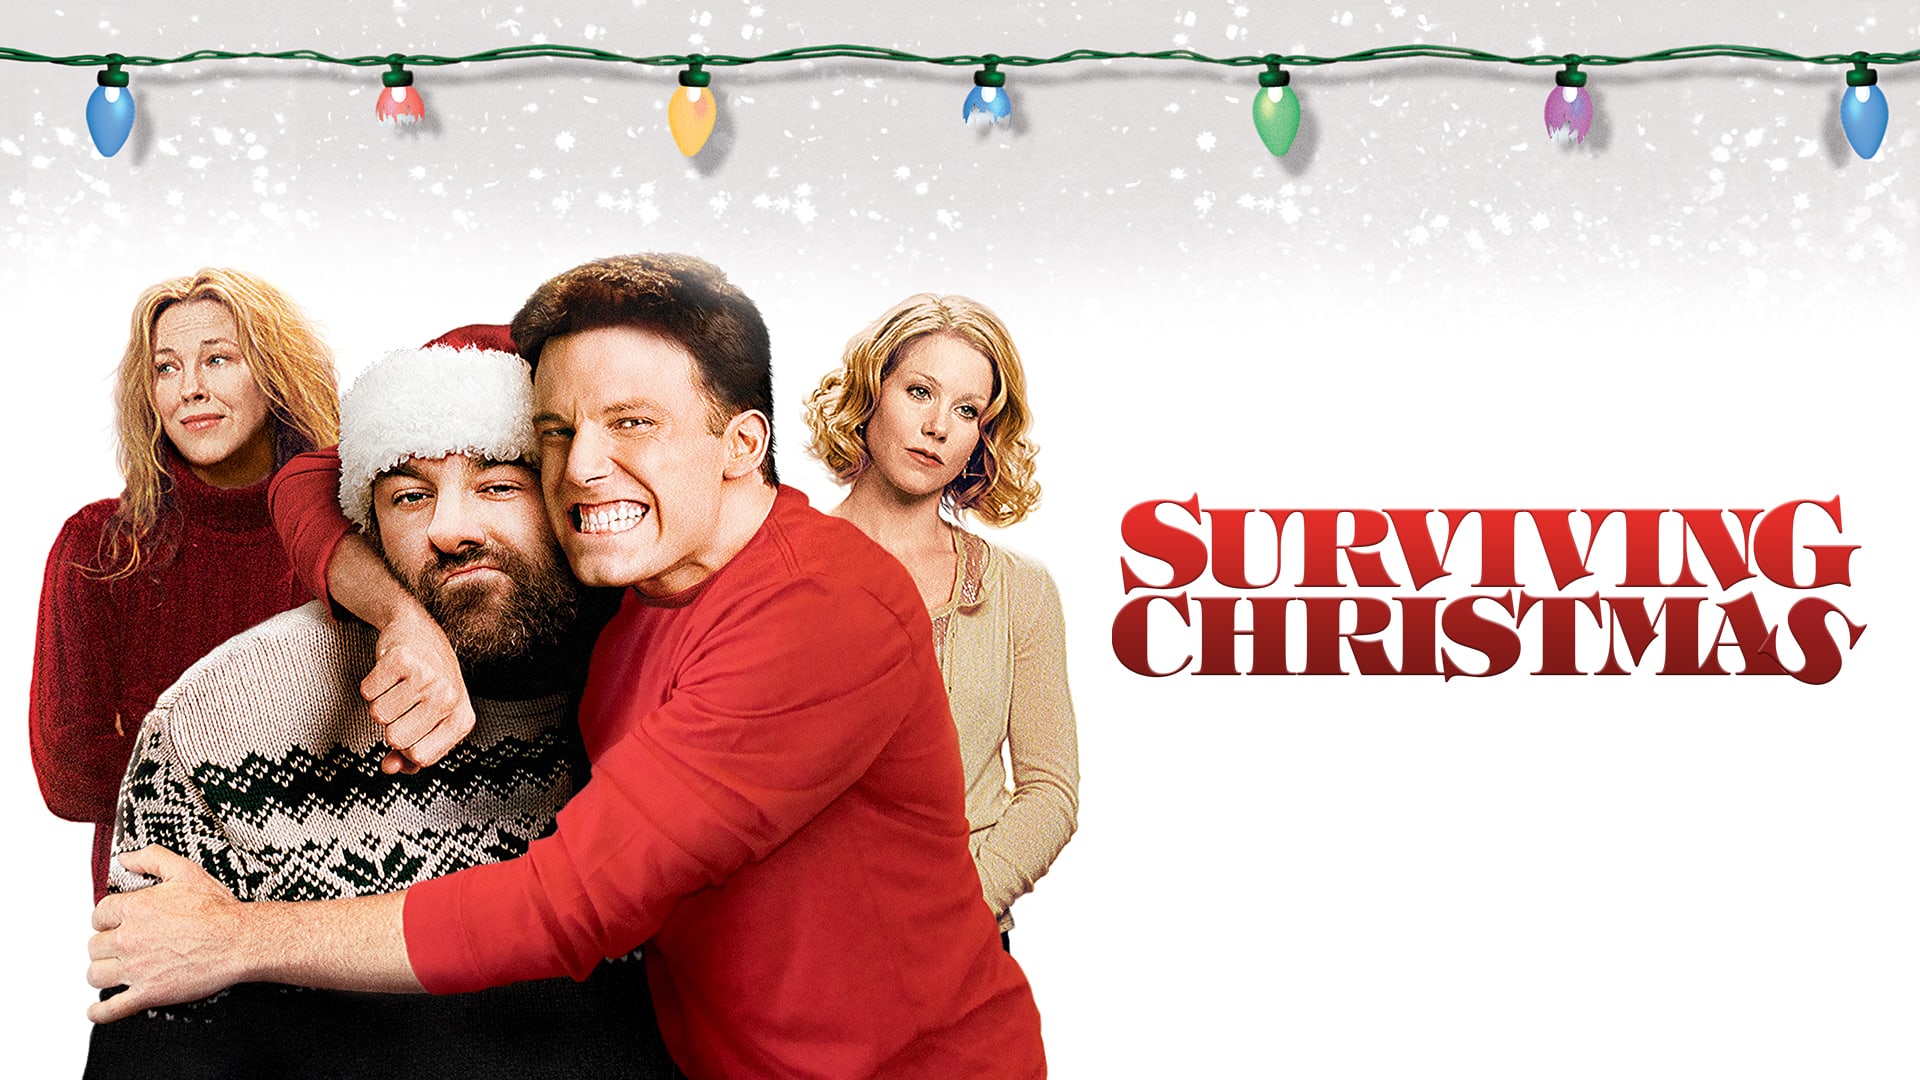 Watch Surviving Christmas Online | Stream Full Movies